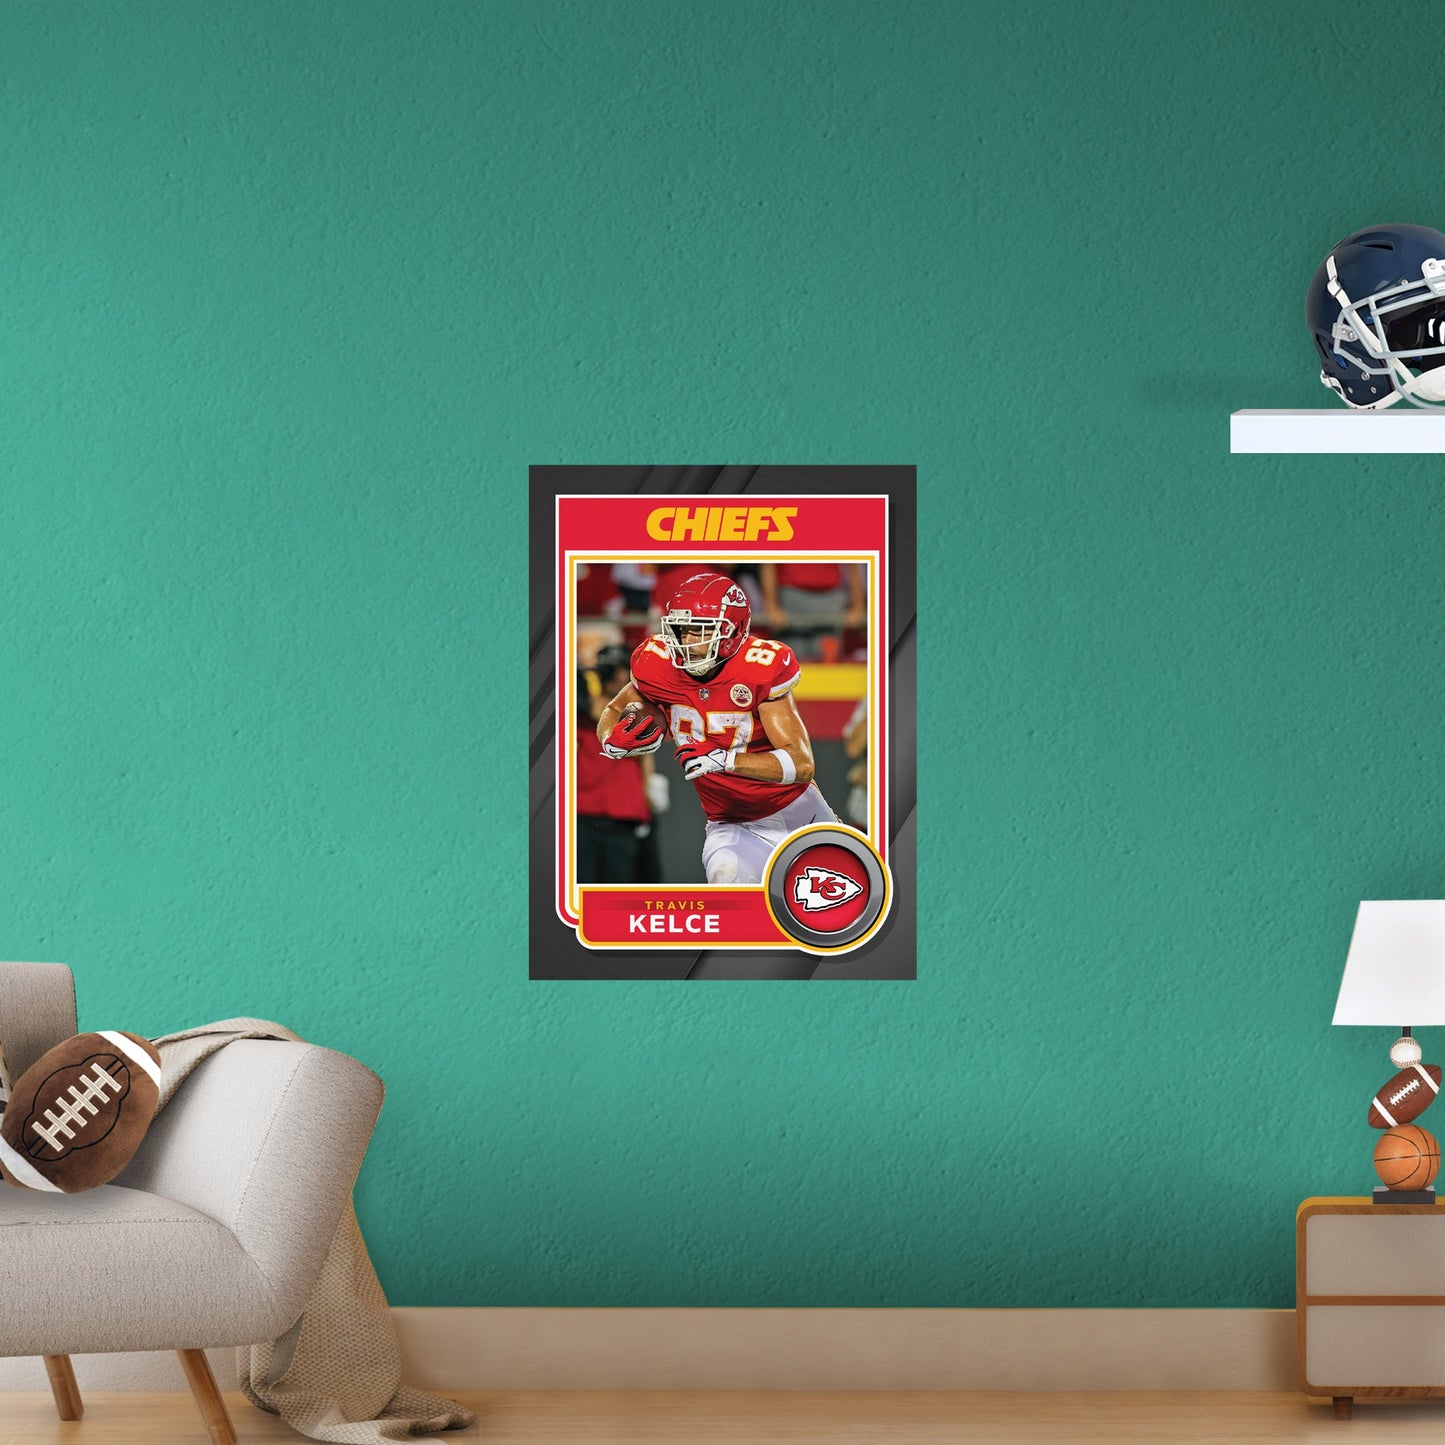 Kansas City Chiefs: Travis Kelce Poster - Officially Licensed NFL Removable Adhesive Decal